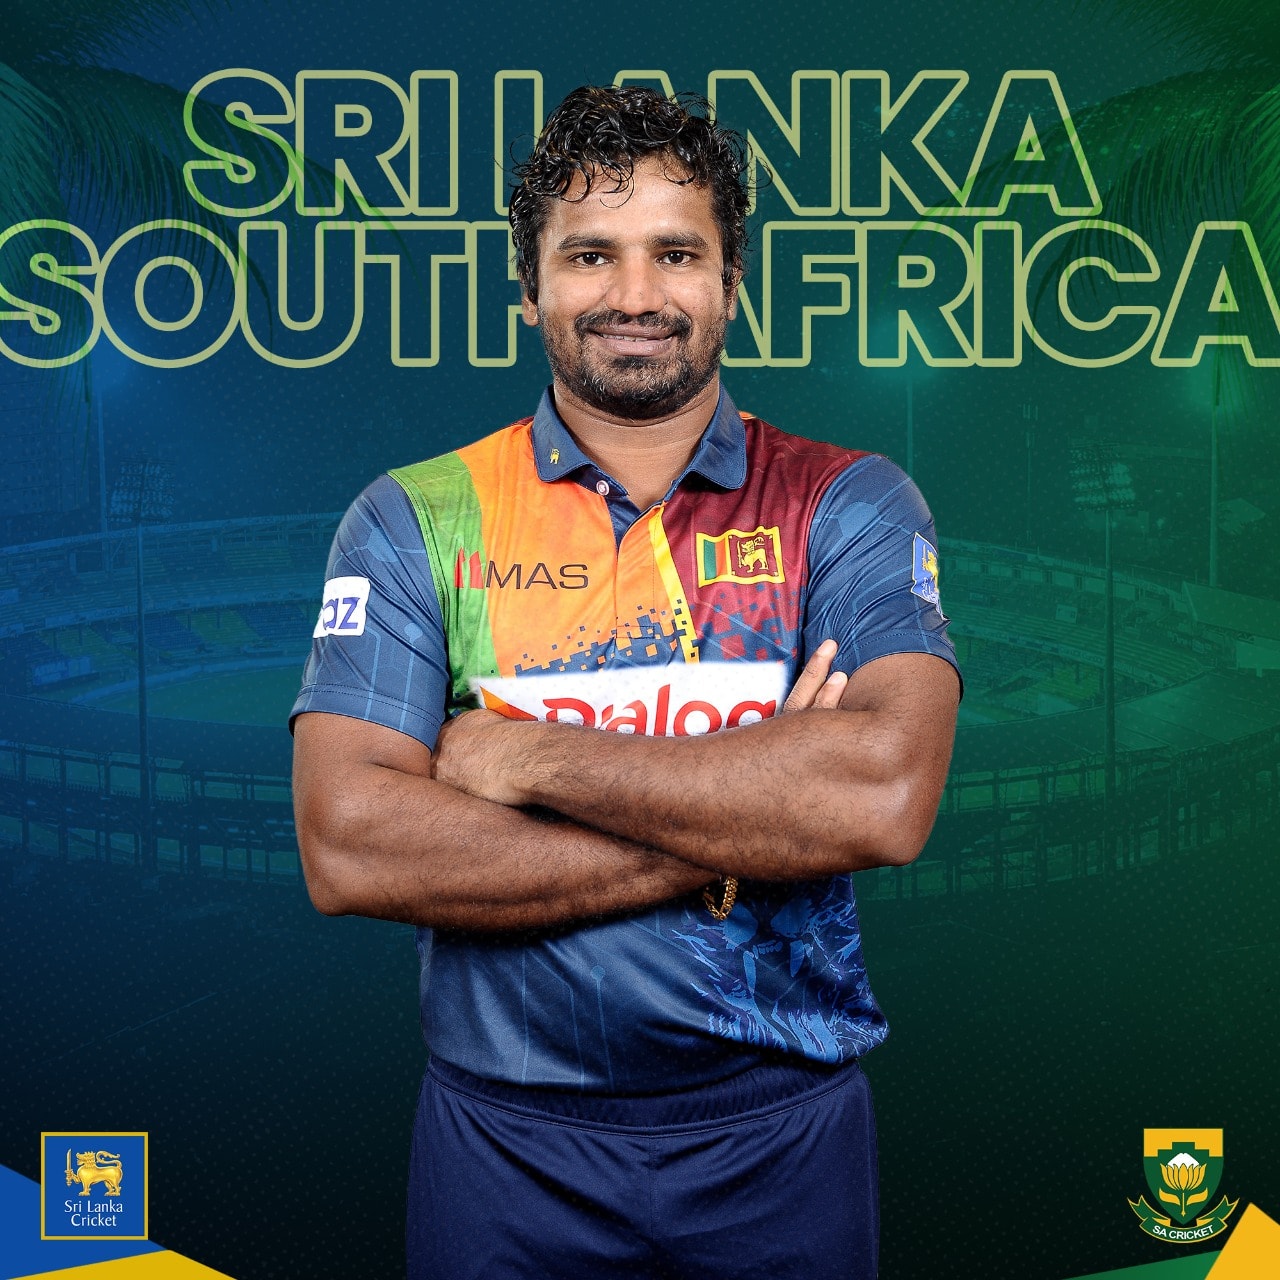 Here's Srilankan squad for the T20I series vs south Africa